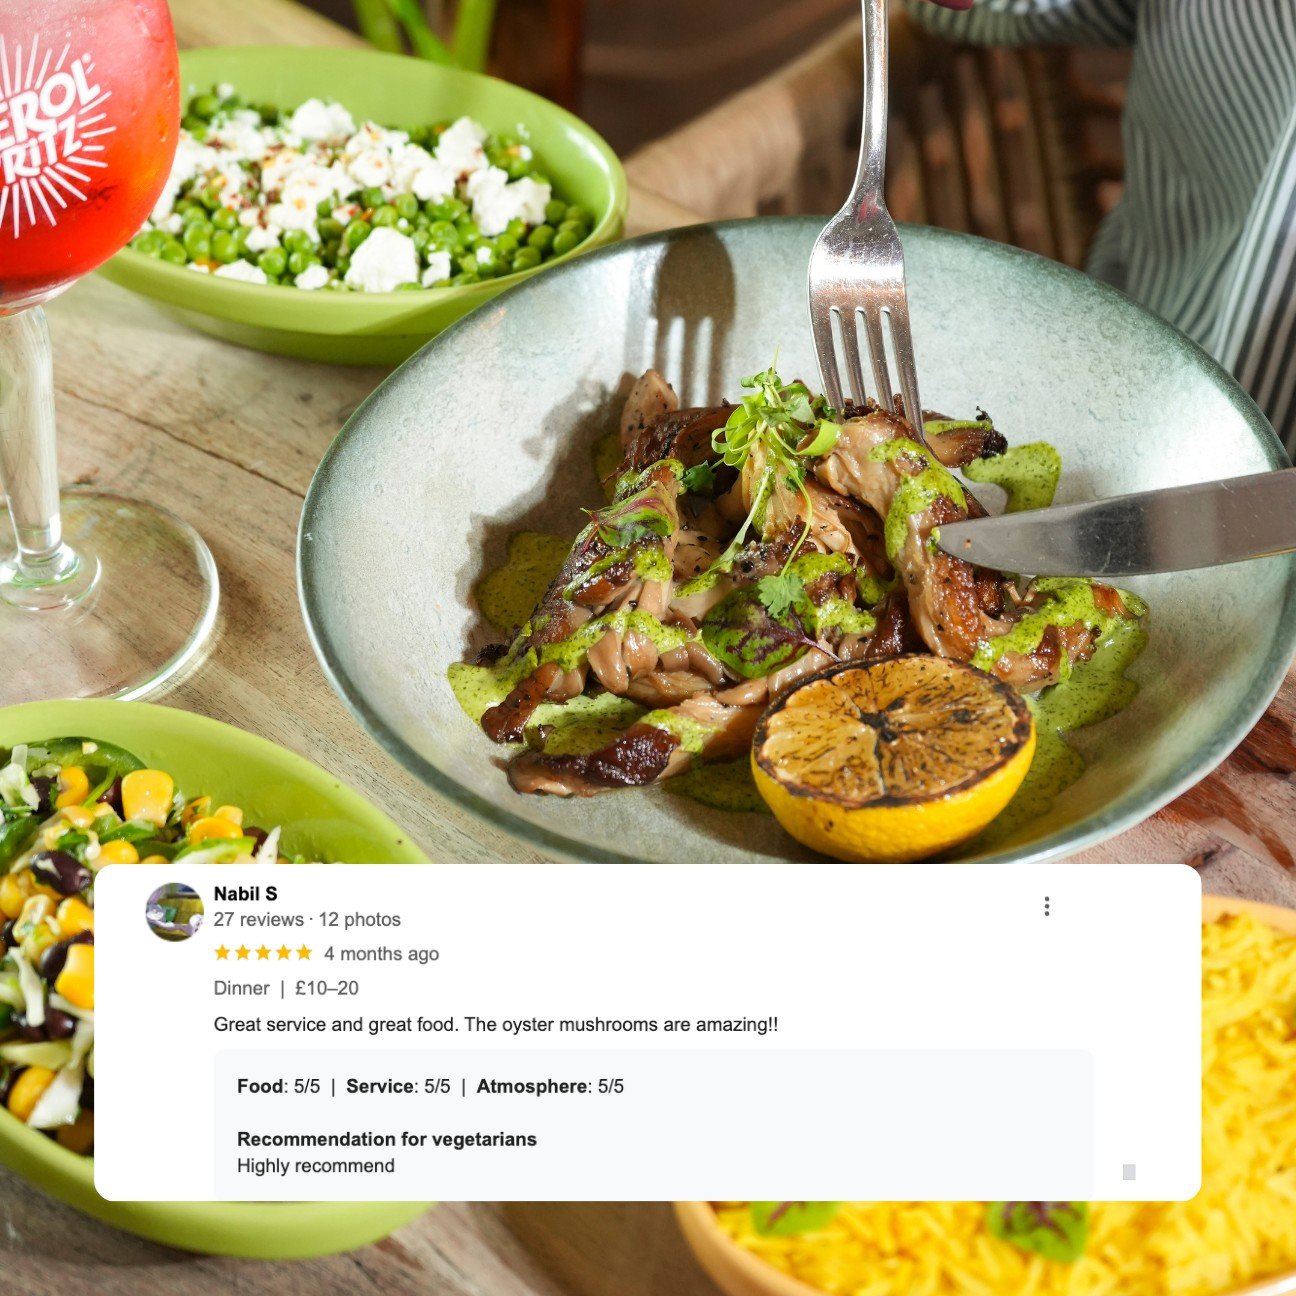 🌟 Thank you so much for the fantastic review! 🌟 We're thrilled to hear that you enjoyed both our service and food, especially our amazing Oyster mushrooms! 😋

Your feedback means the world to us! If you&rsquo;re come down to BAHA recently, we'd lo